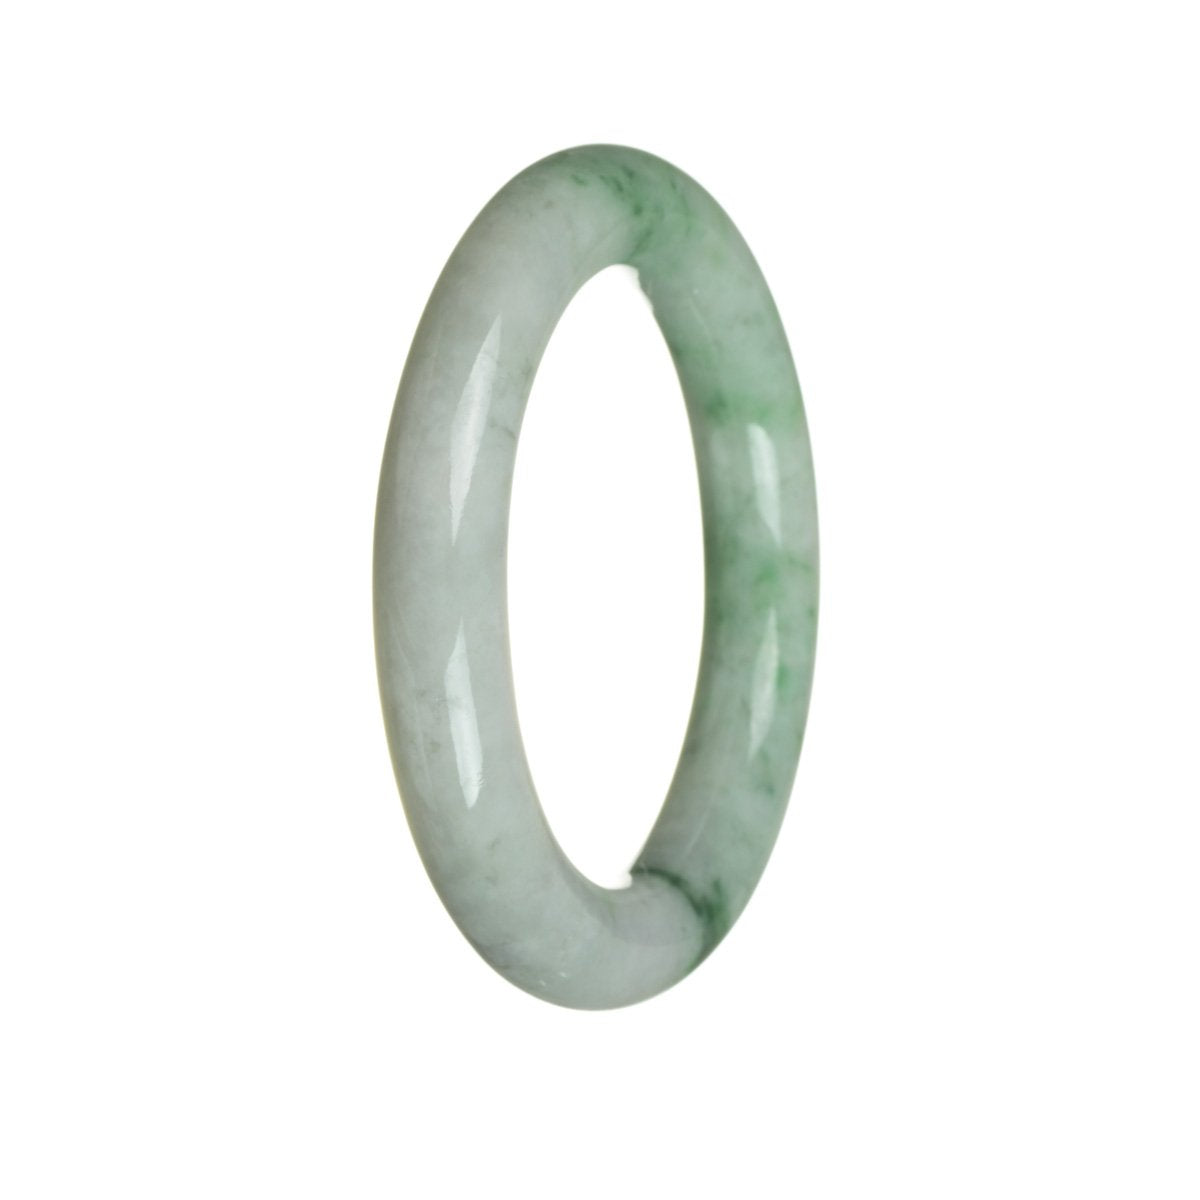 A beautiful white Burmese jade bangle bracelet, untreated and genuine, with a round shape measuring 56mm. Created by MAYS™.